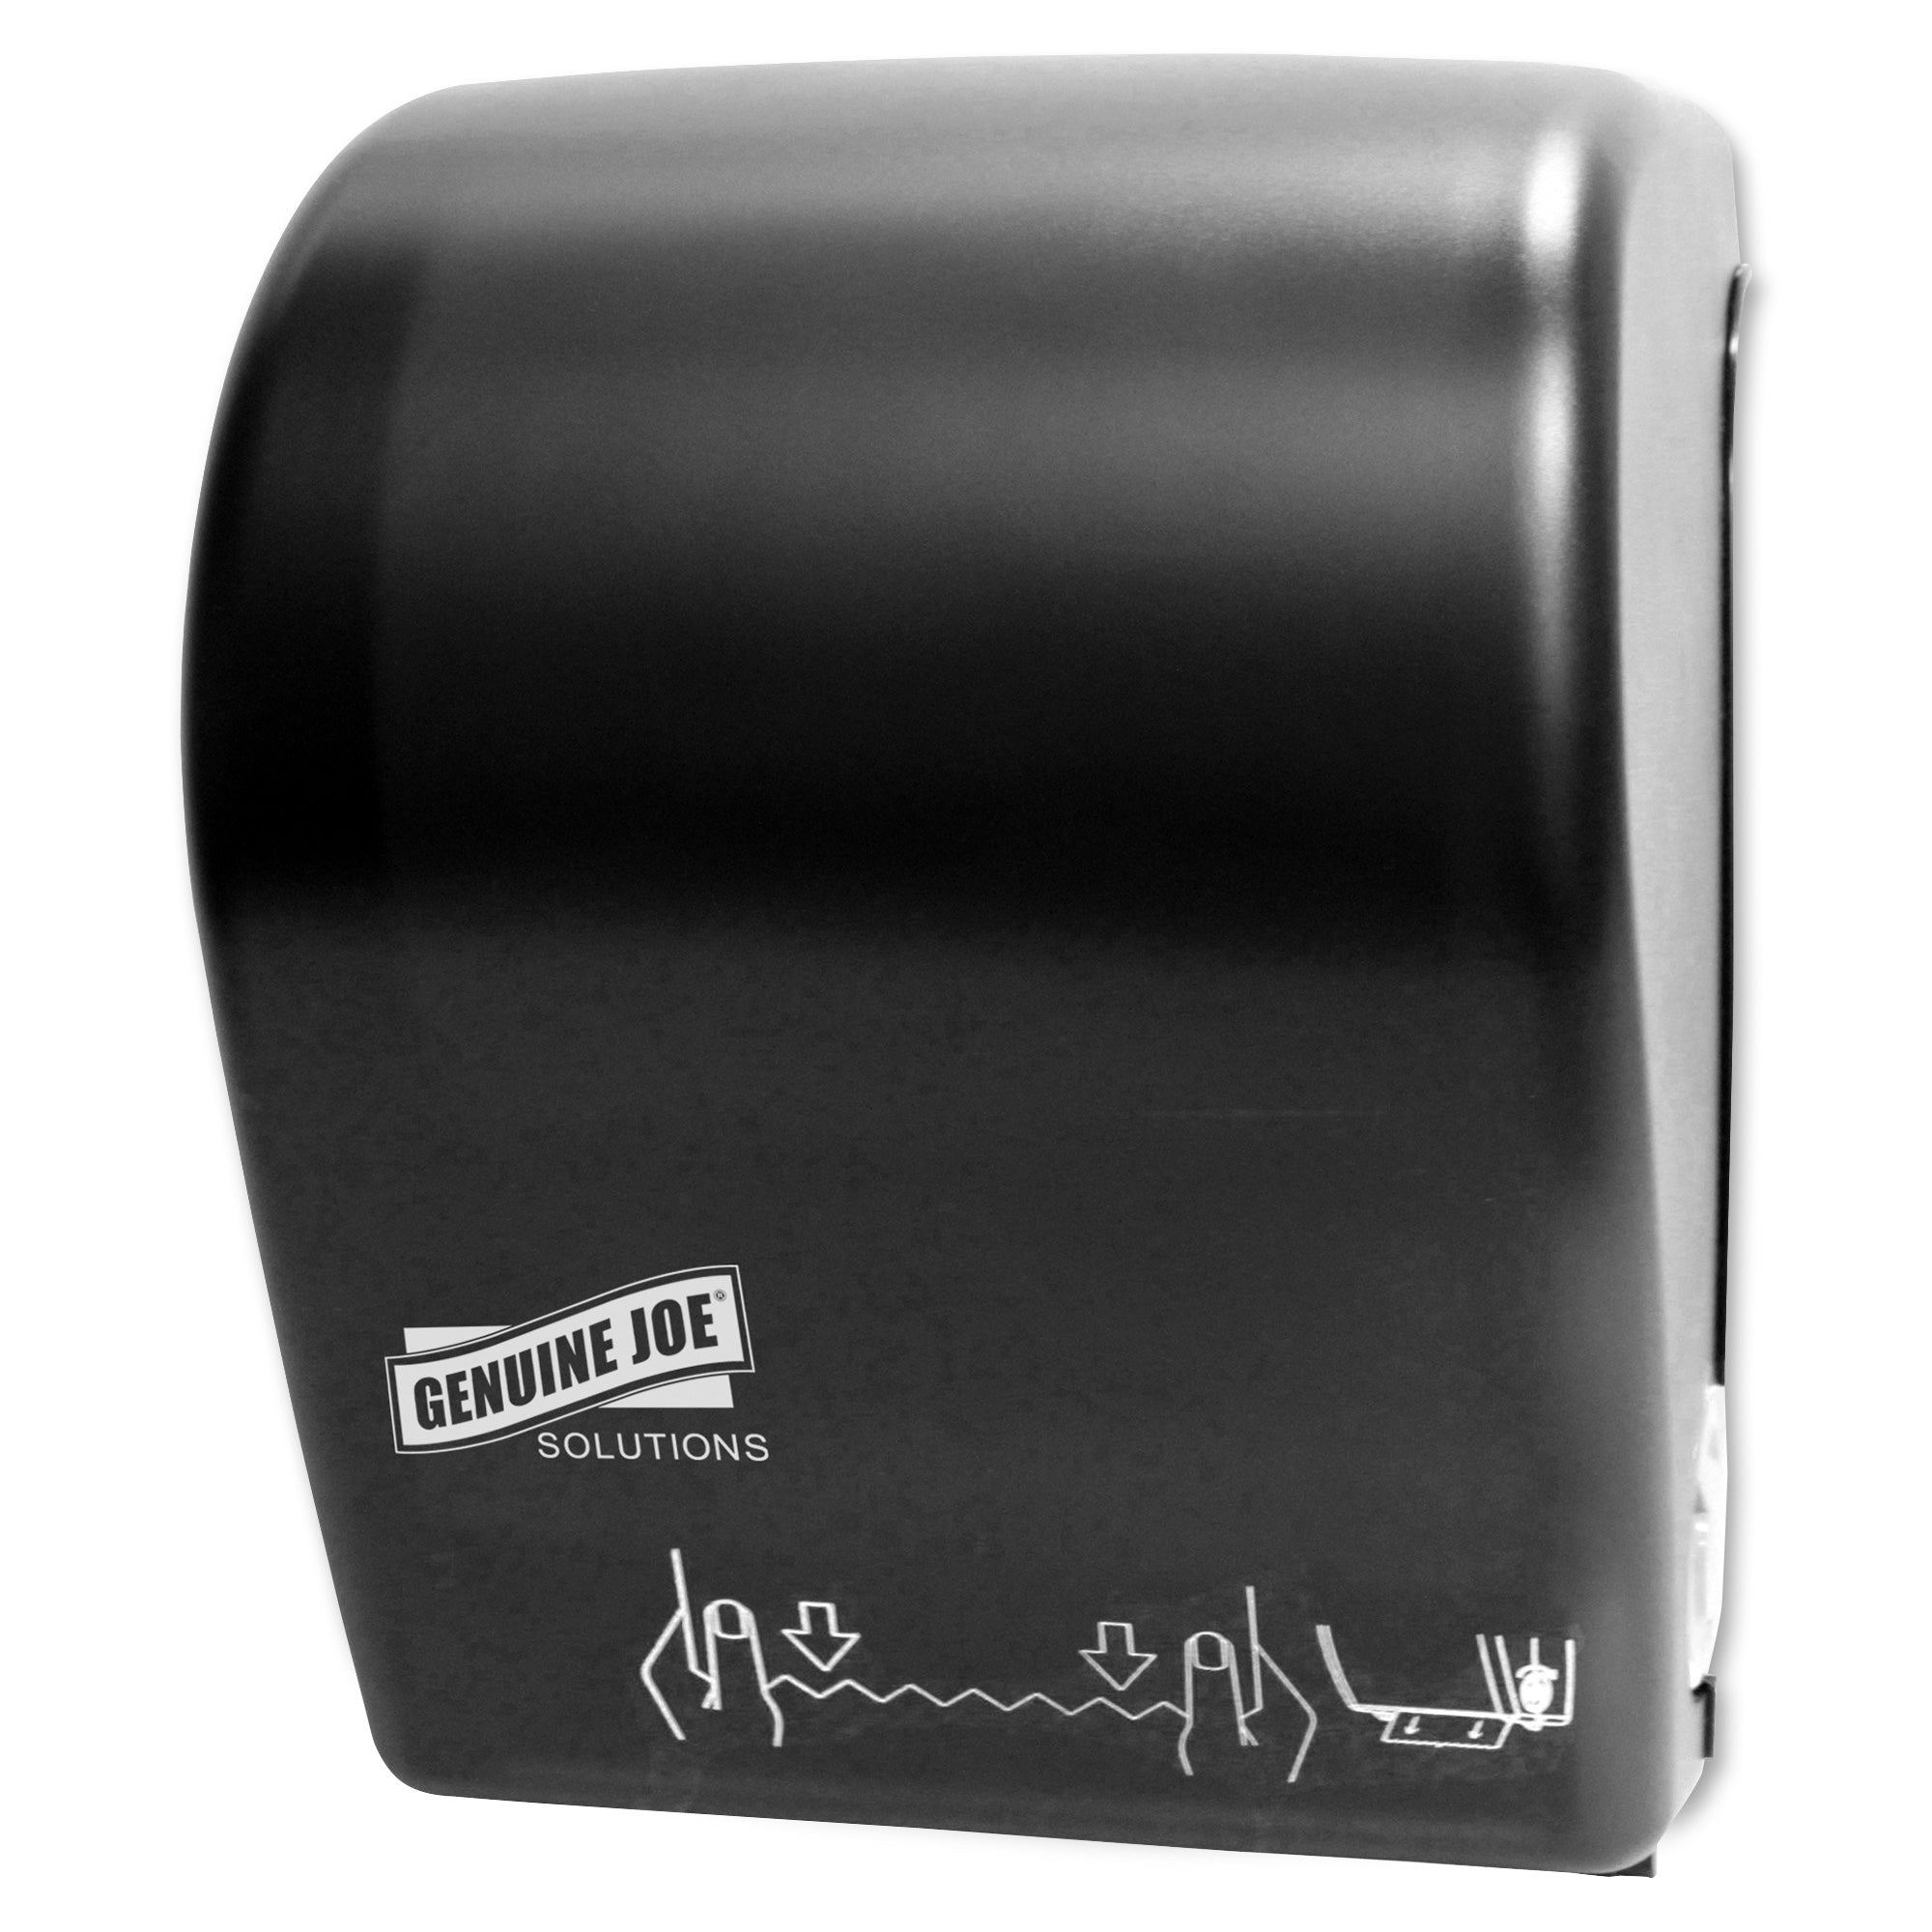 Genuine Joe Solutions Touchless Hardwound Towel Dispenser - Touchless, Hardwound Roll - Black - Touch-free, Anti-bacterial - 1 Each - 1